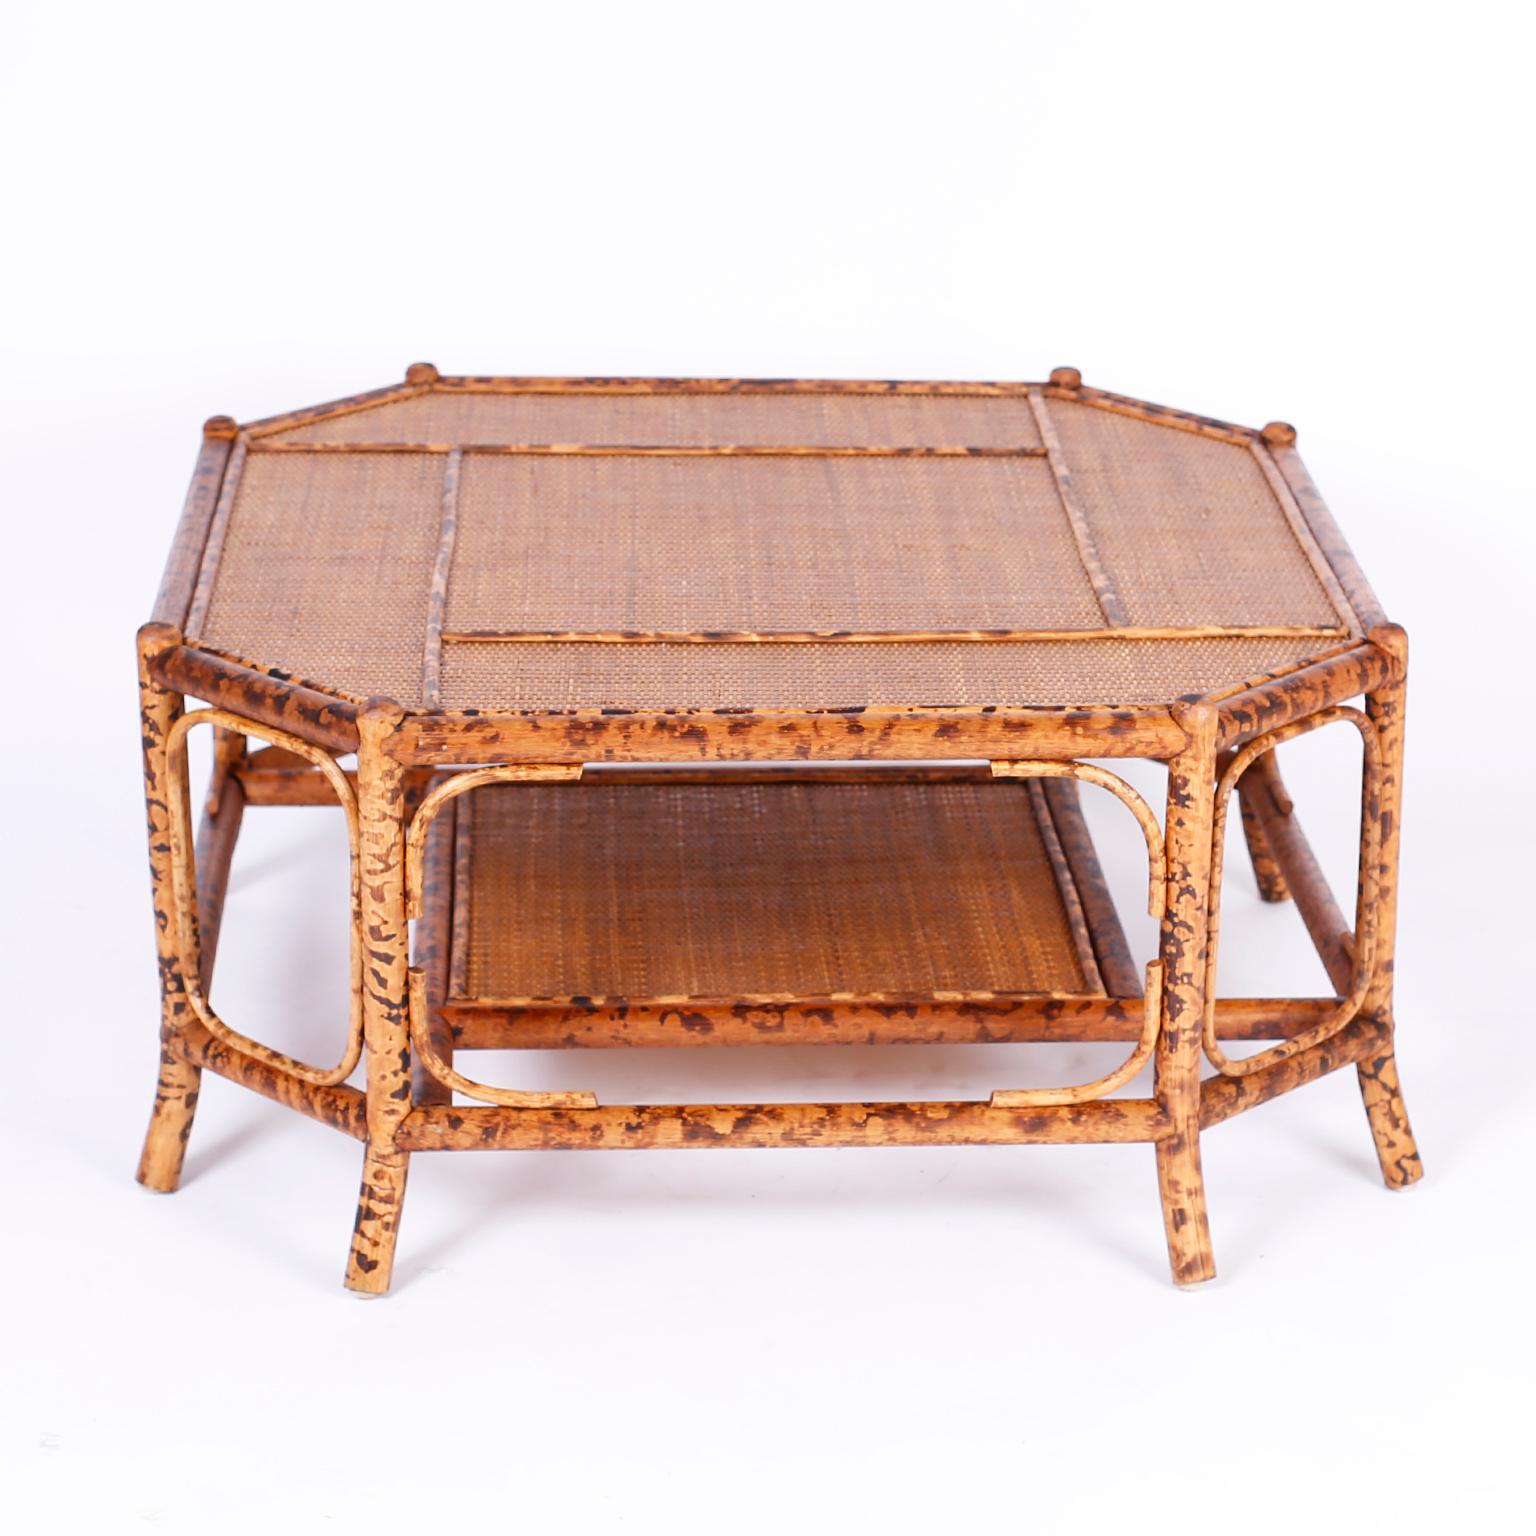 British Colonial octagon form coffee table with an eight legged faux burnt bamboo frame having splayed feet and two tiers of grasscloth horizontal surfaces. Perfect mix of Classic and modern.